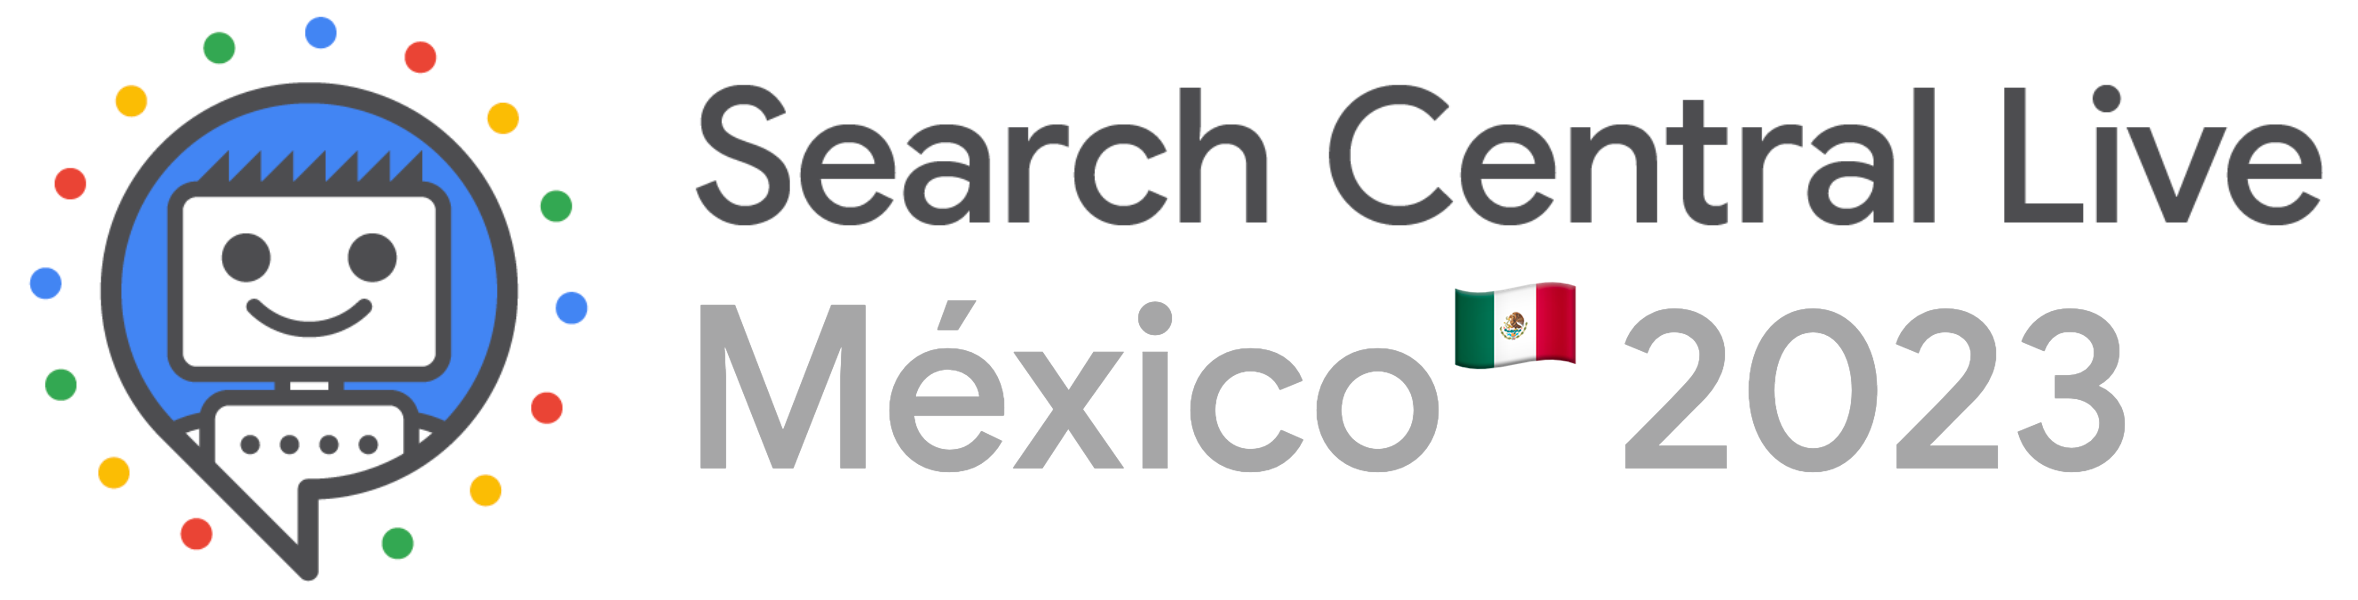 Announcing the Search Central Live Mexico roadshow  |  Google Search Central Blog  |  Google for Developers